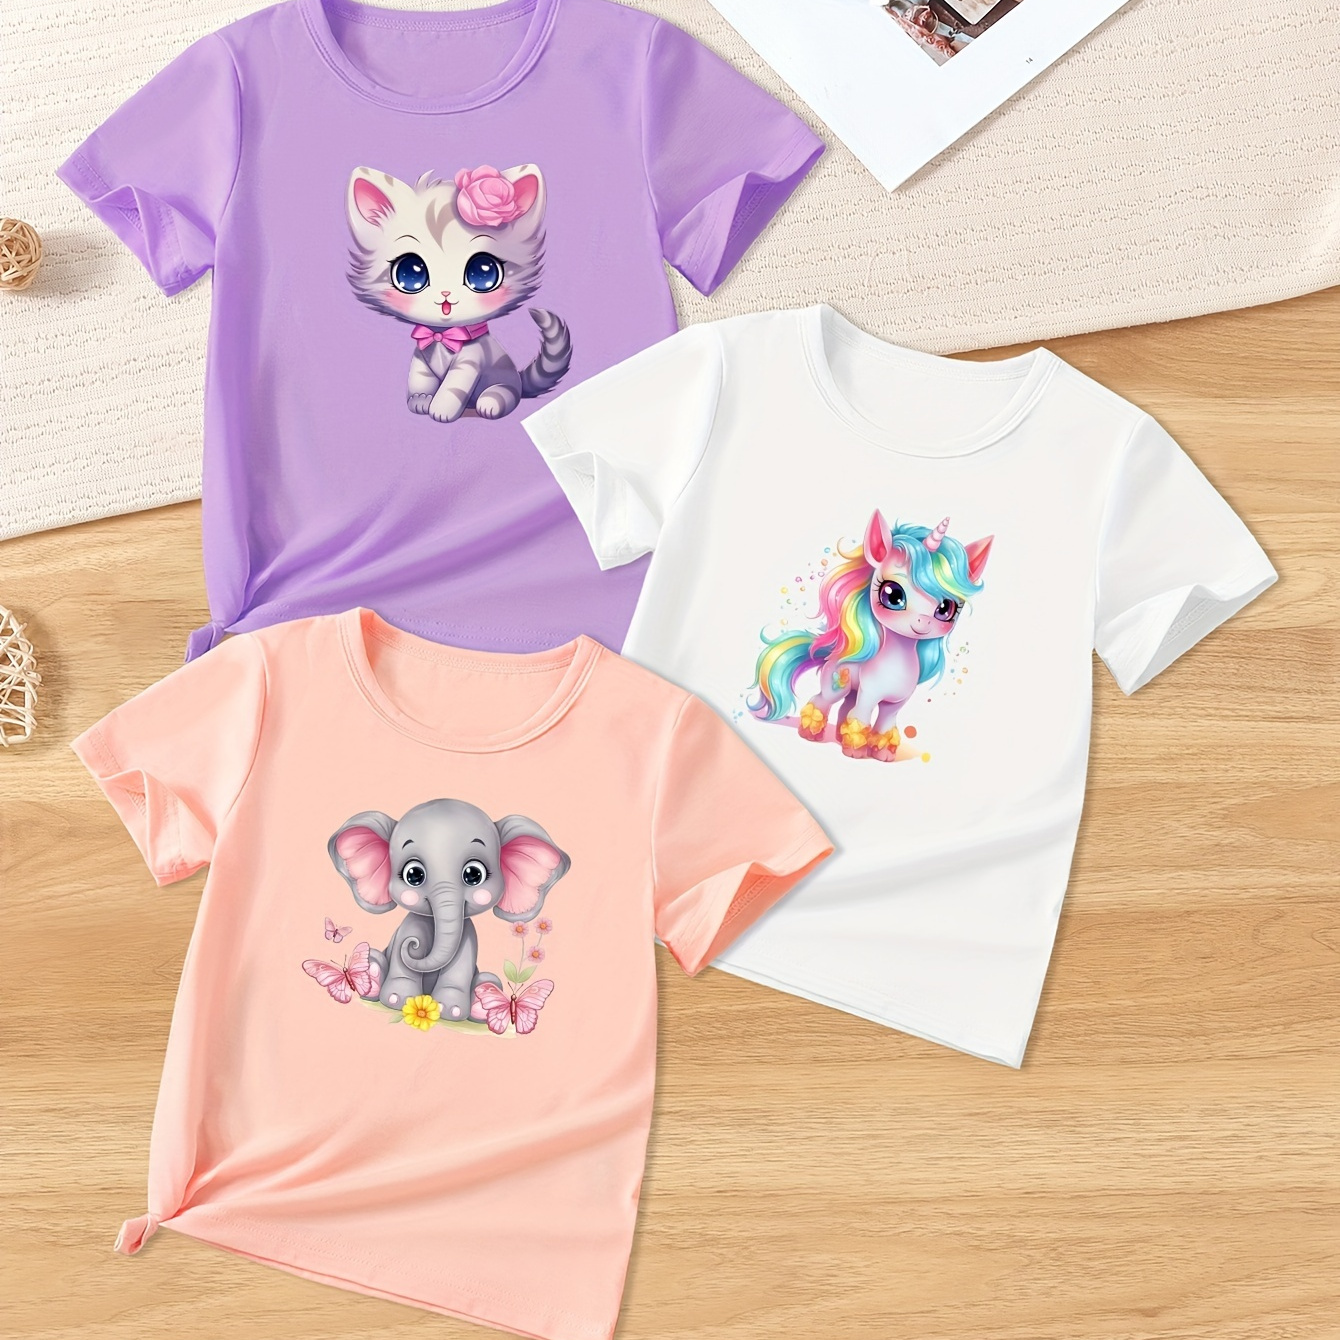 

Cute Cartoon Cat/elephant/unicorn Graphic Print, Girls' 3pcs/set Casual Comfy Crew Neck Short Sleeve T-shirt For Spring And Summer, Girls' Clothes For Everyday Life